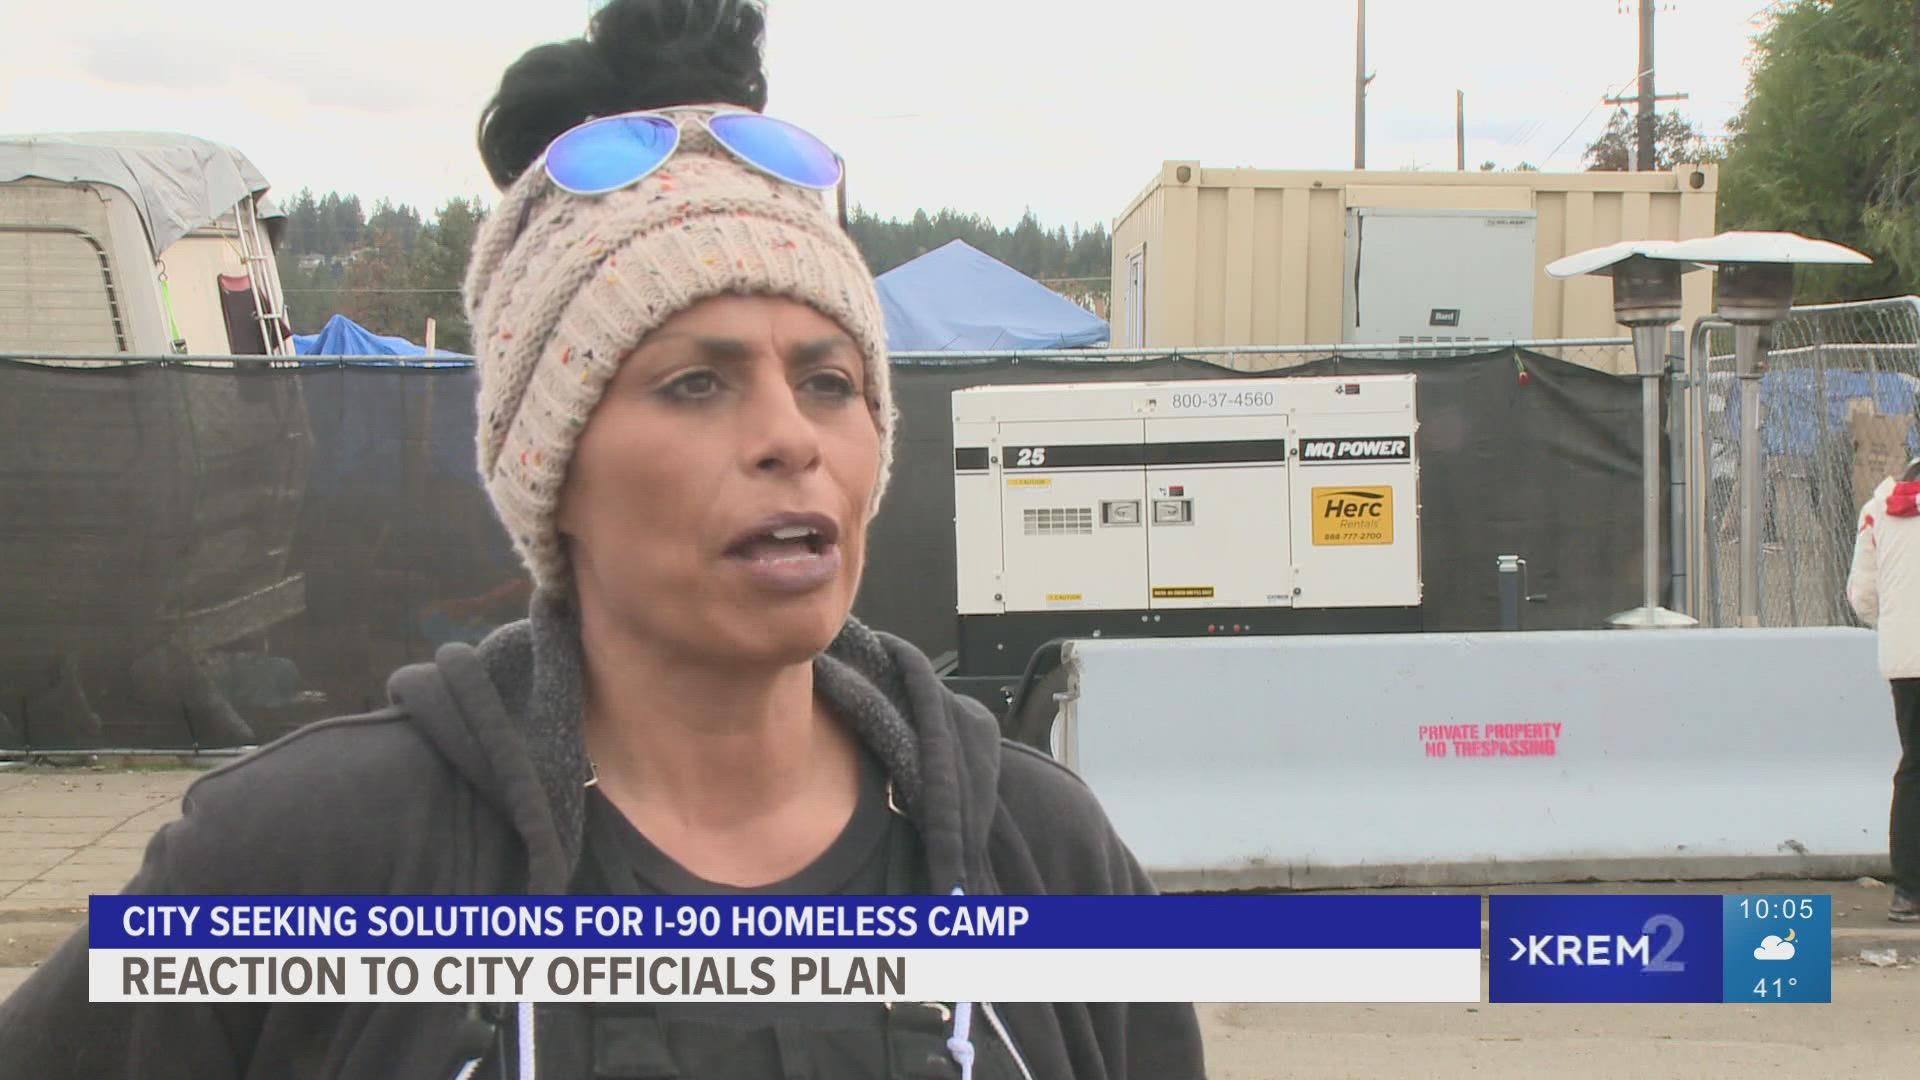 Jewels Founder Julie Garcia says people at the camp are nervous and on edge as the clearing date nears.